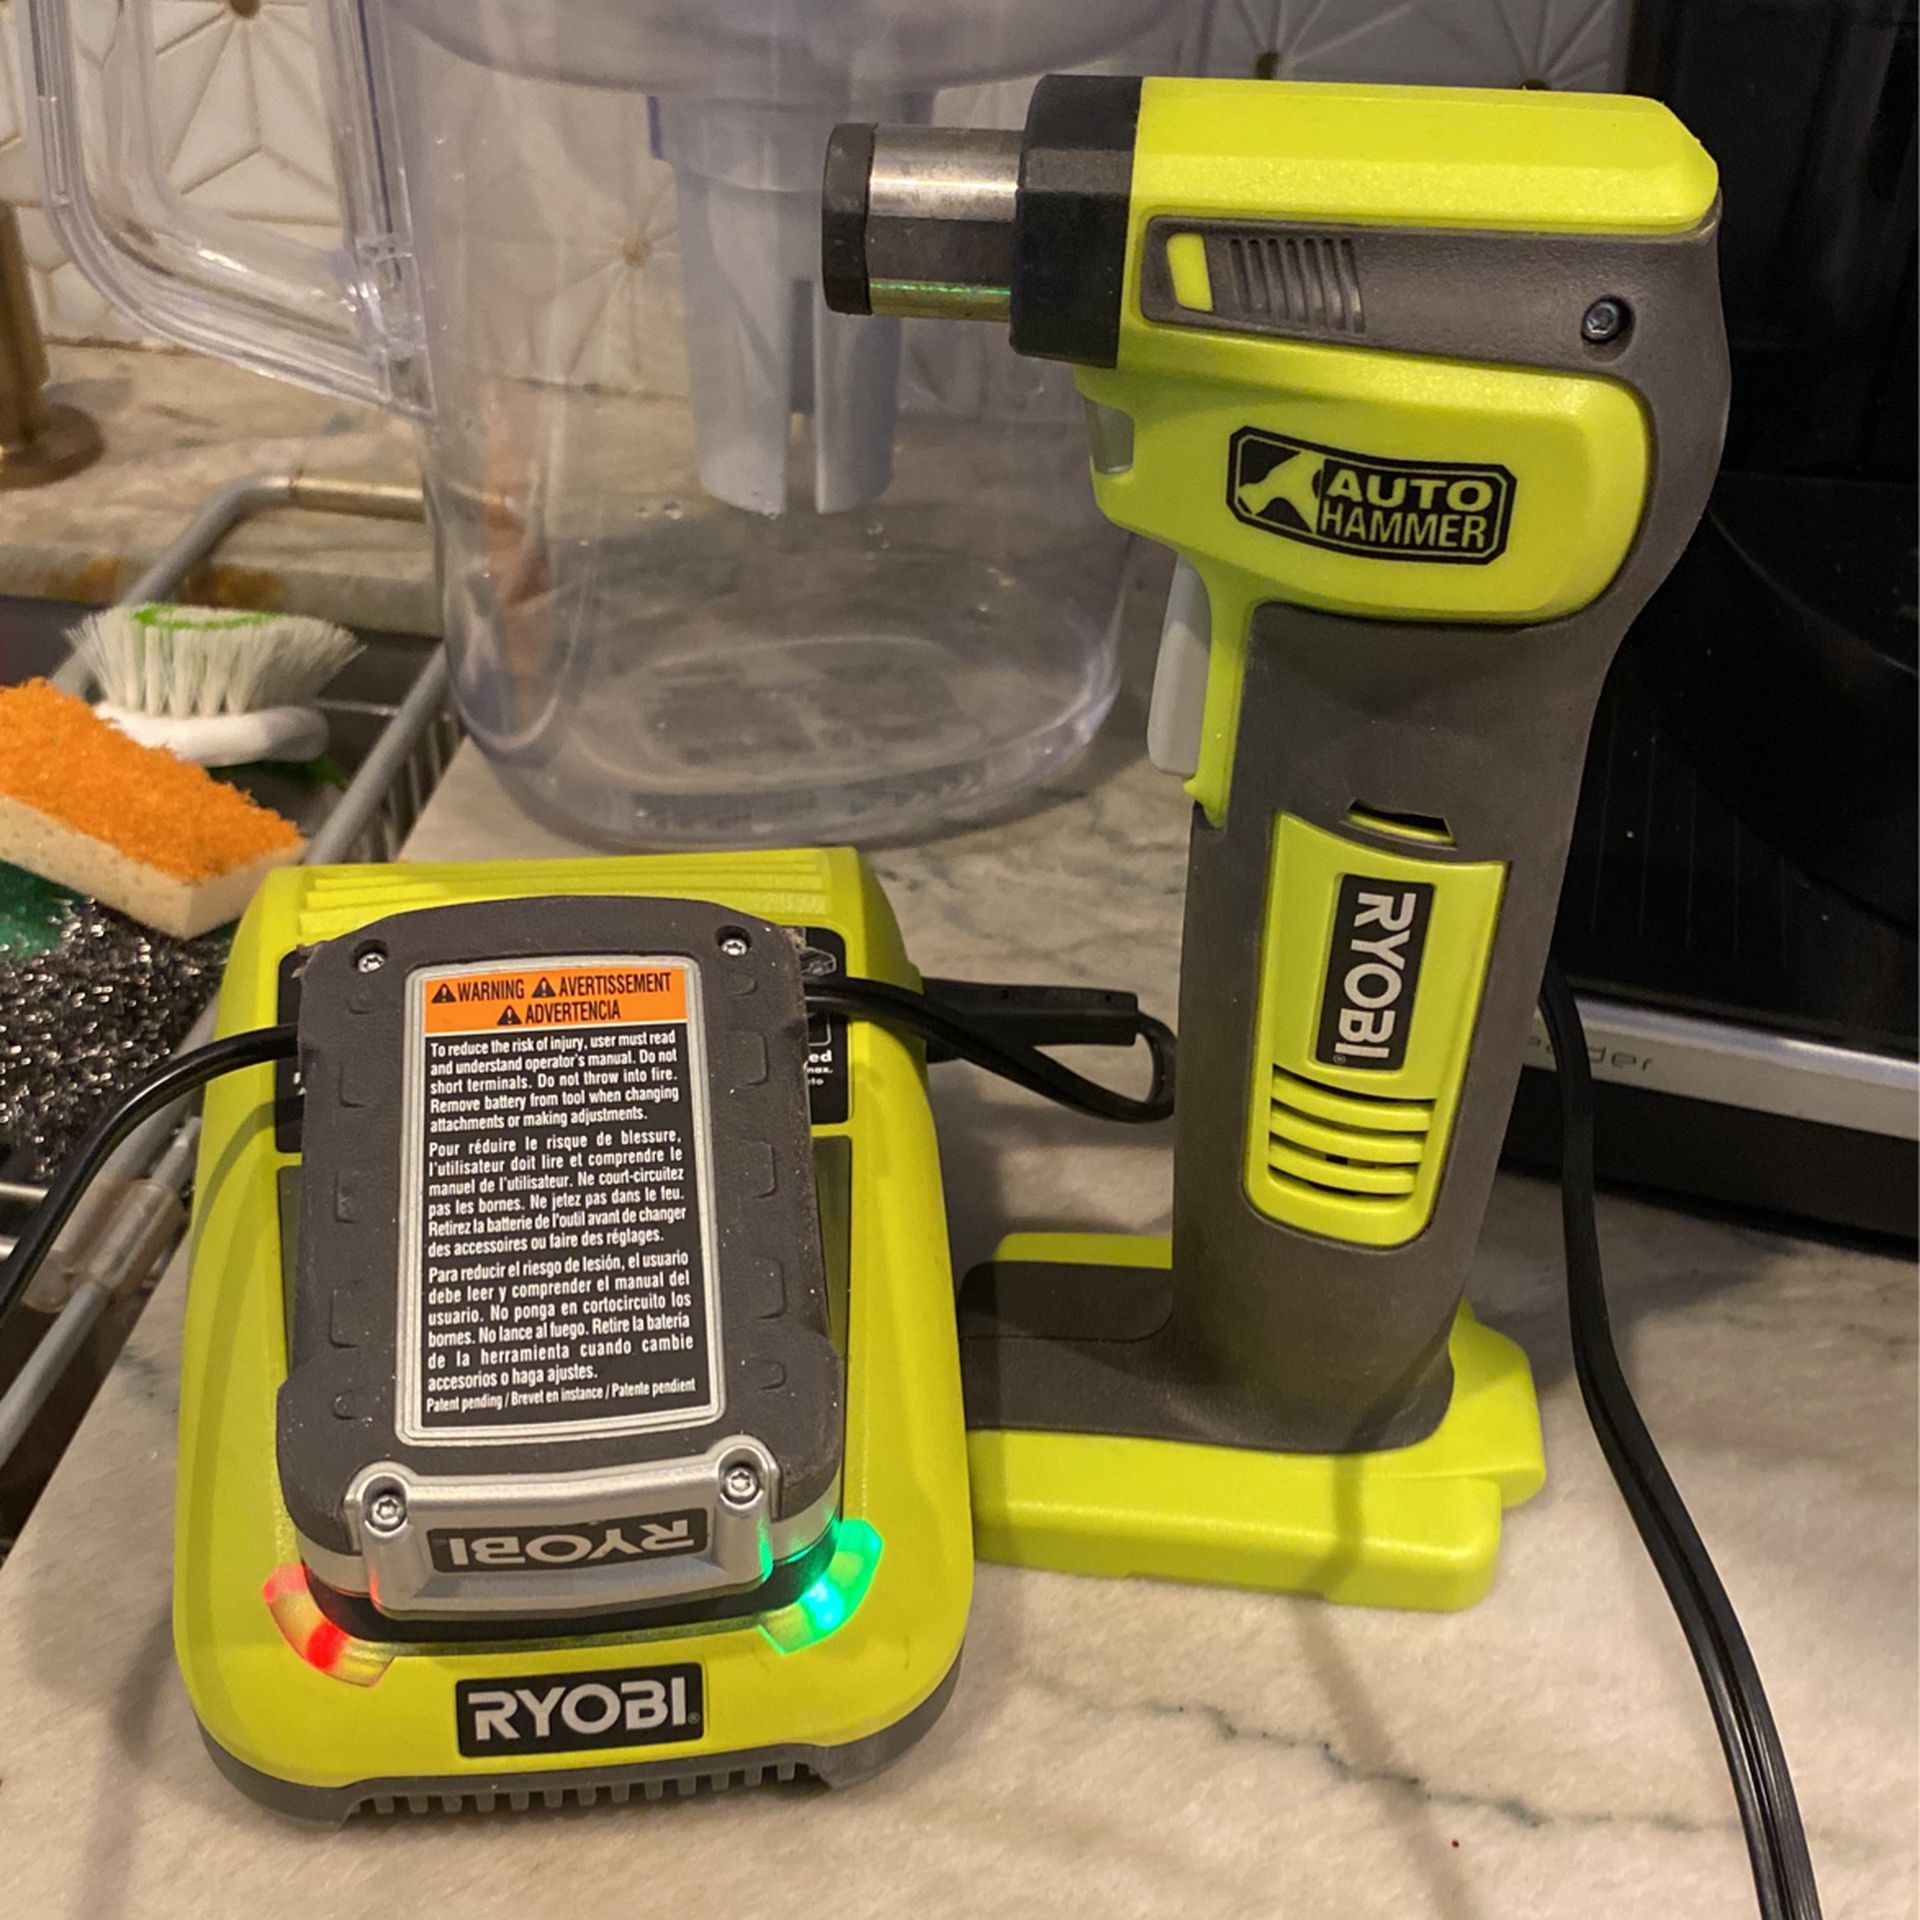 Auto Hammer Tool Ryobi Battery And Charger